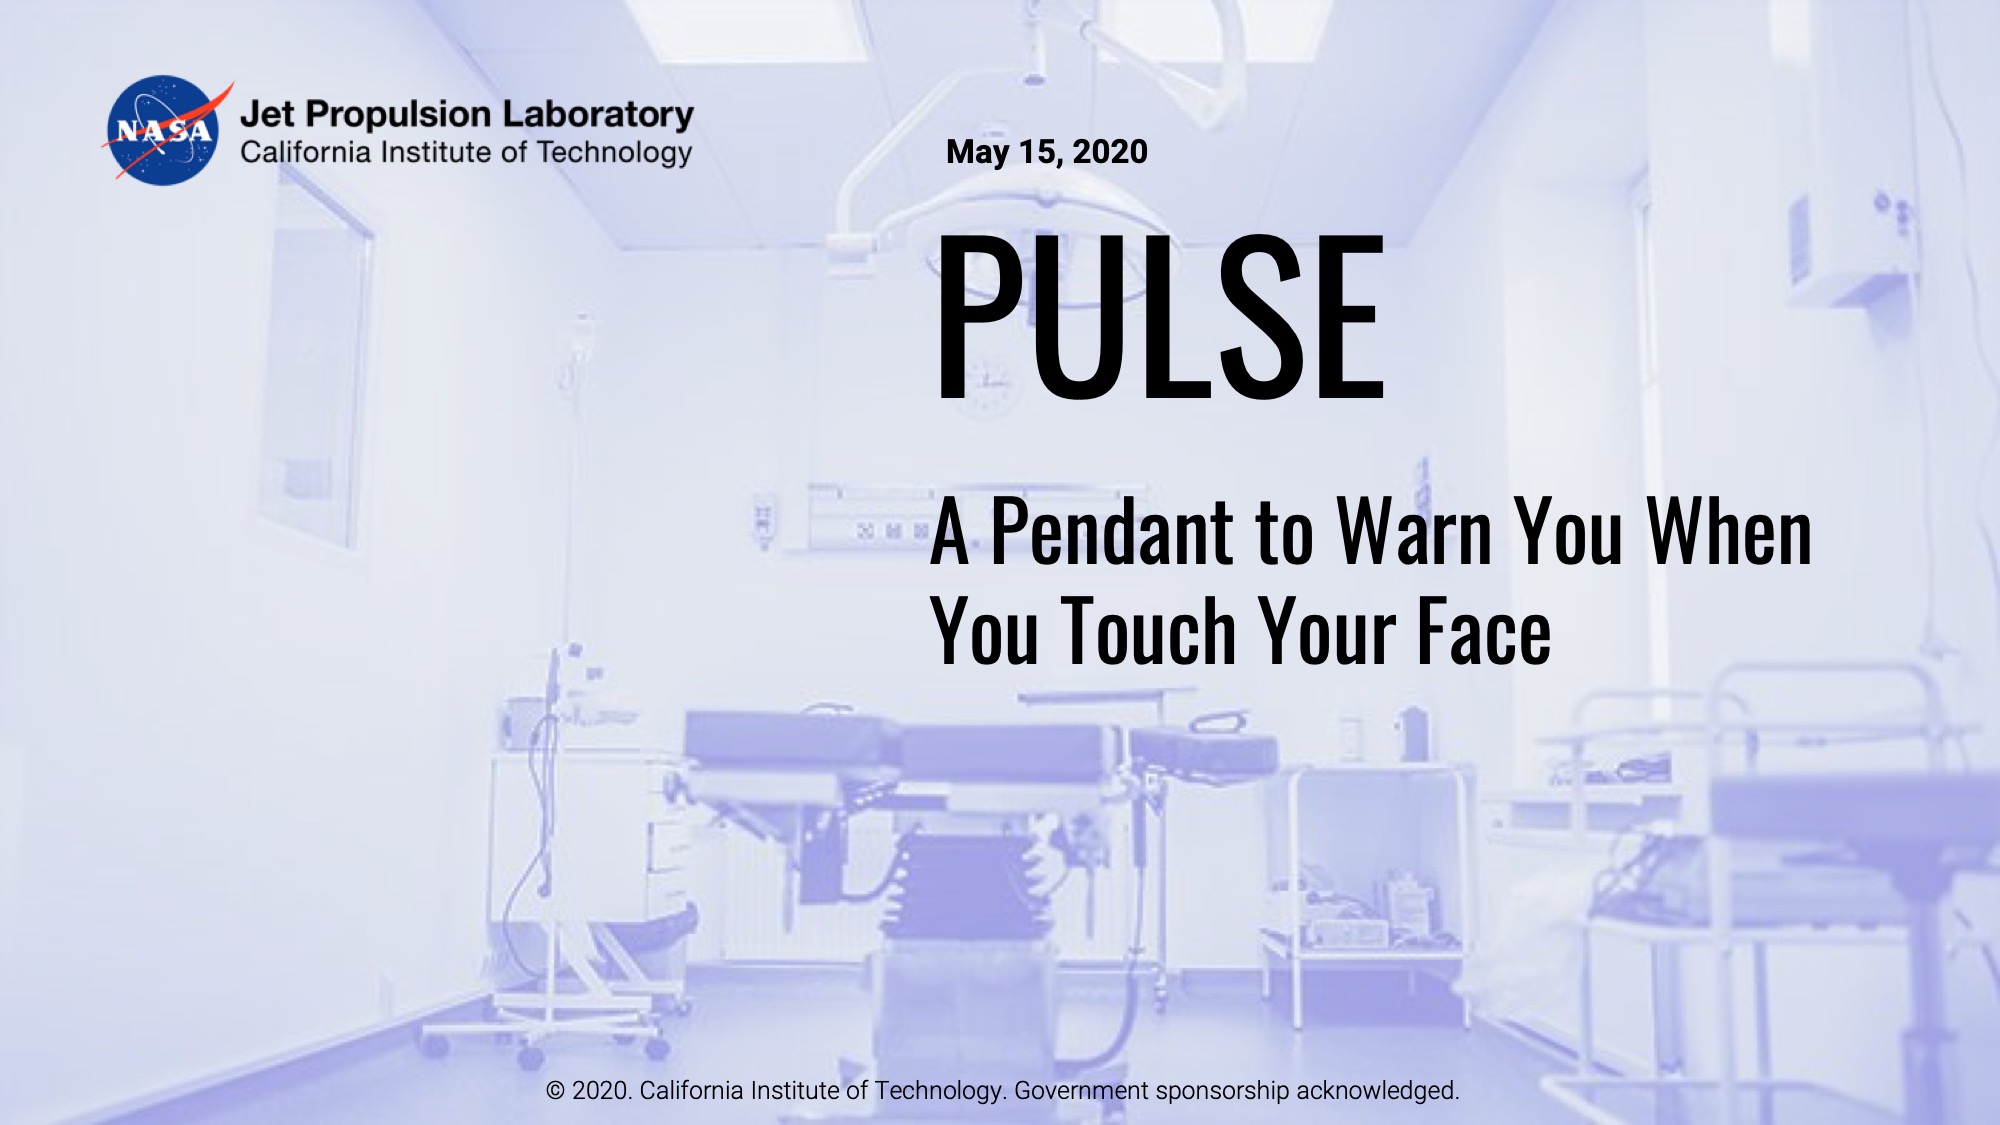 PULSE: A Pendant to Warn You When You Touch Your Face